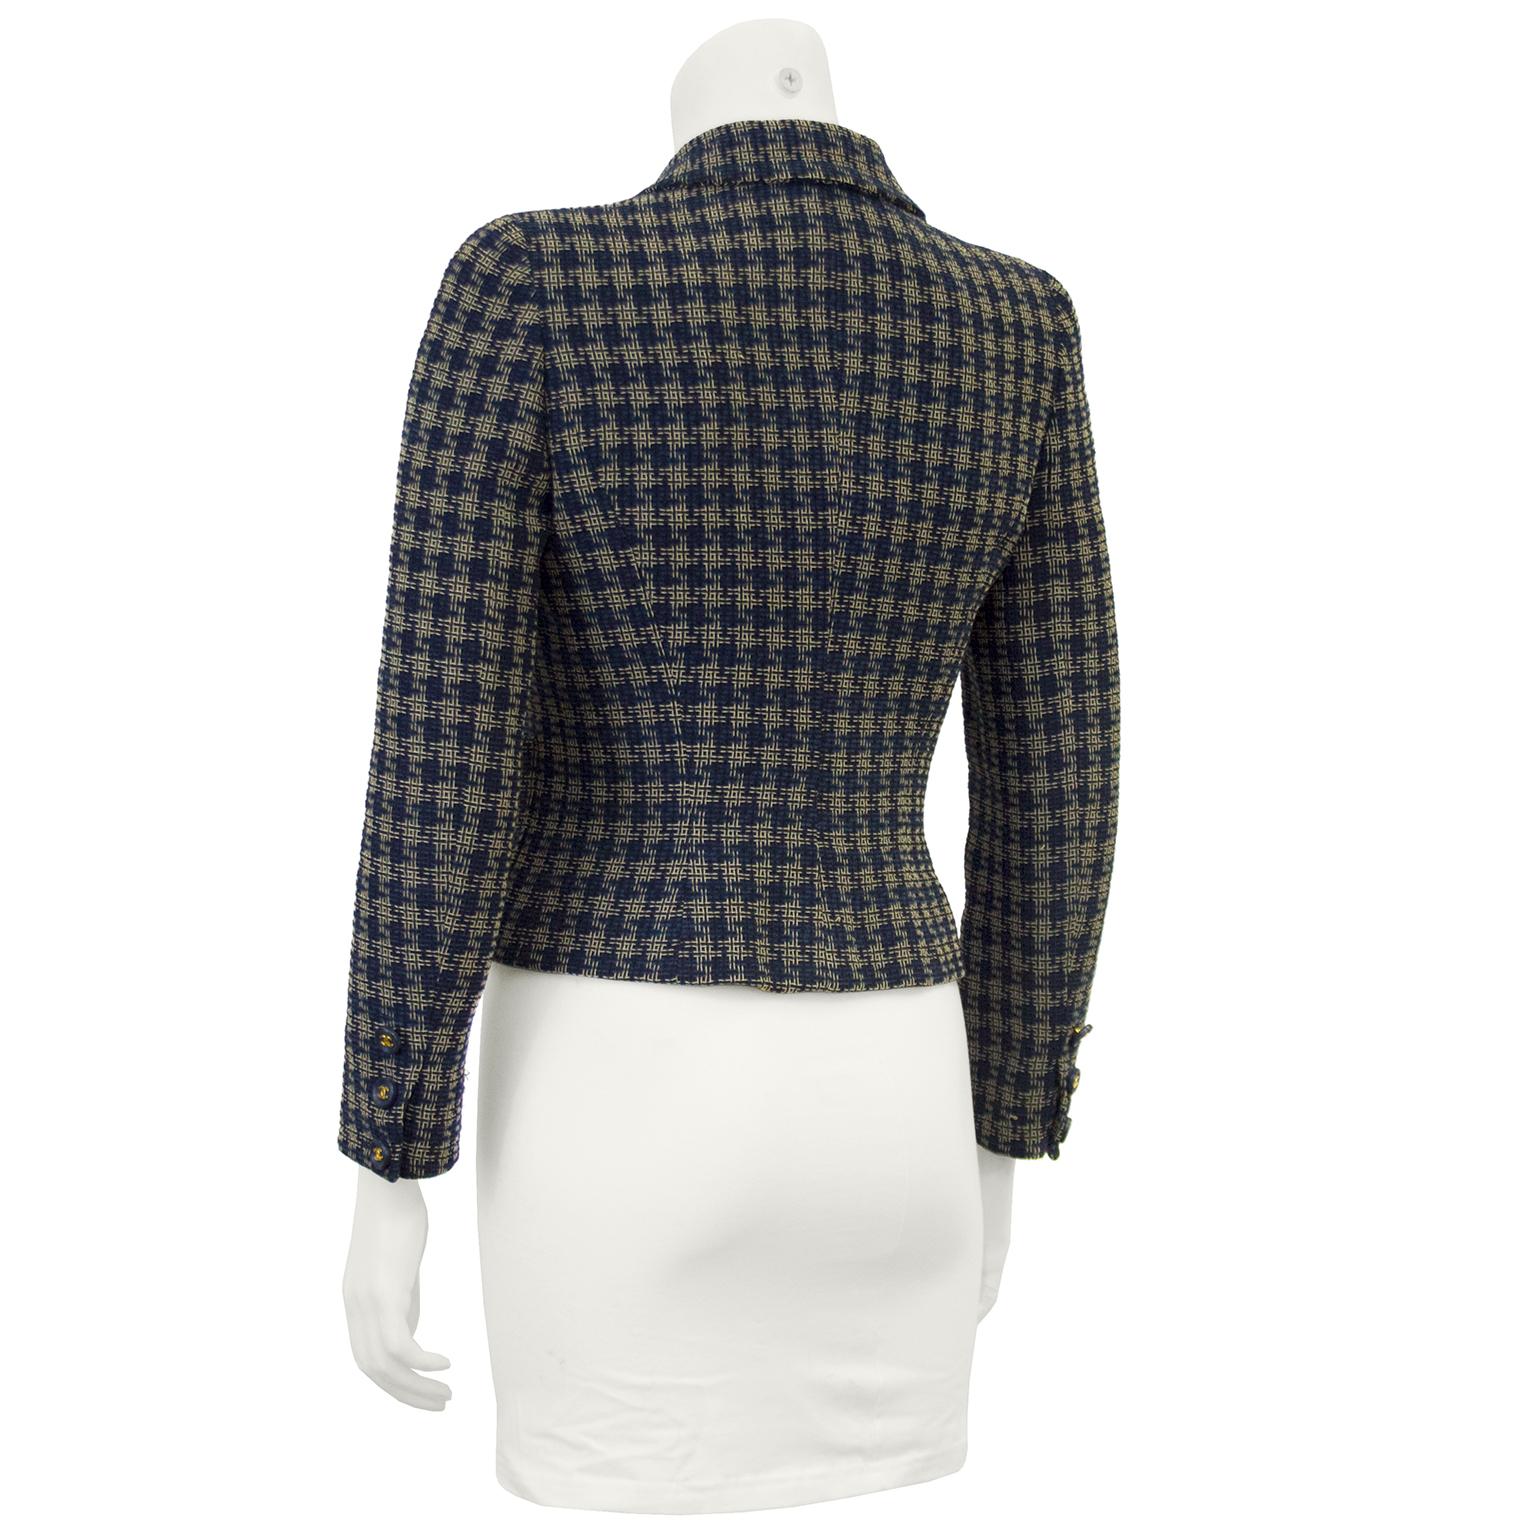 Black 1990s Chanel Navy and Cream Woven Plaid Cropped Jacket